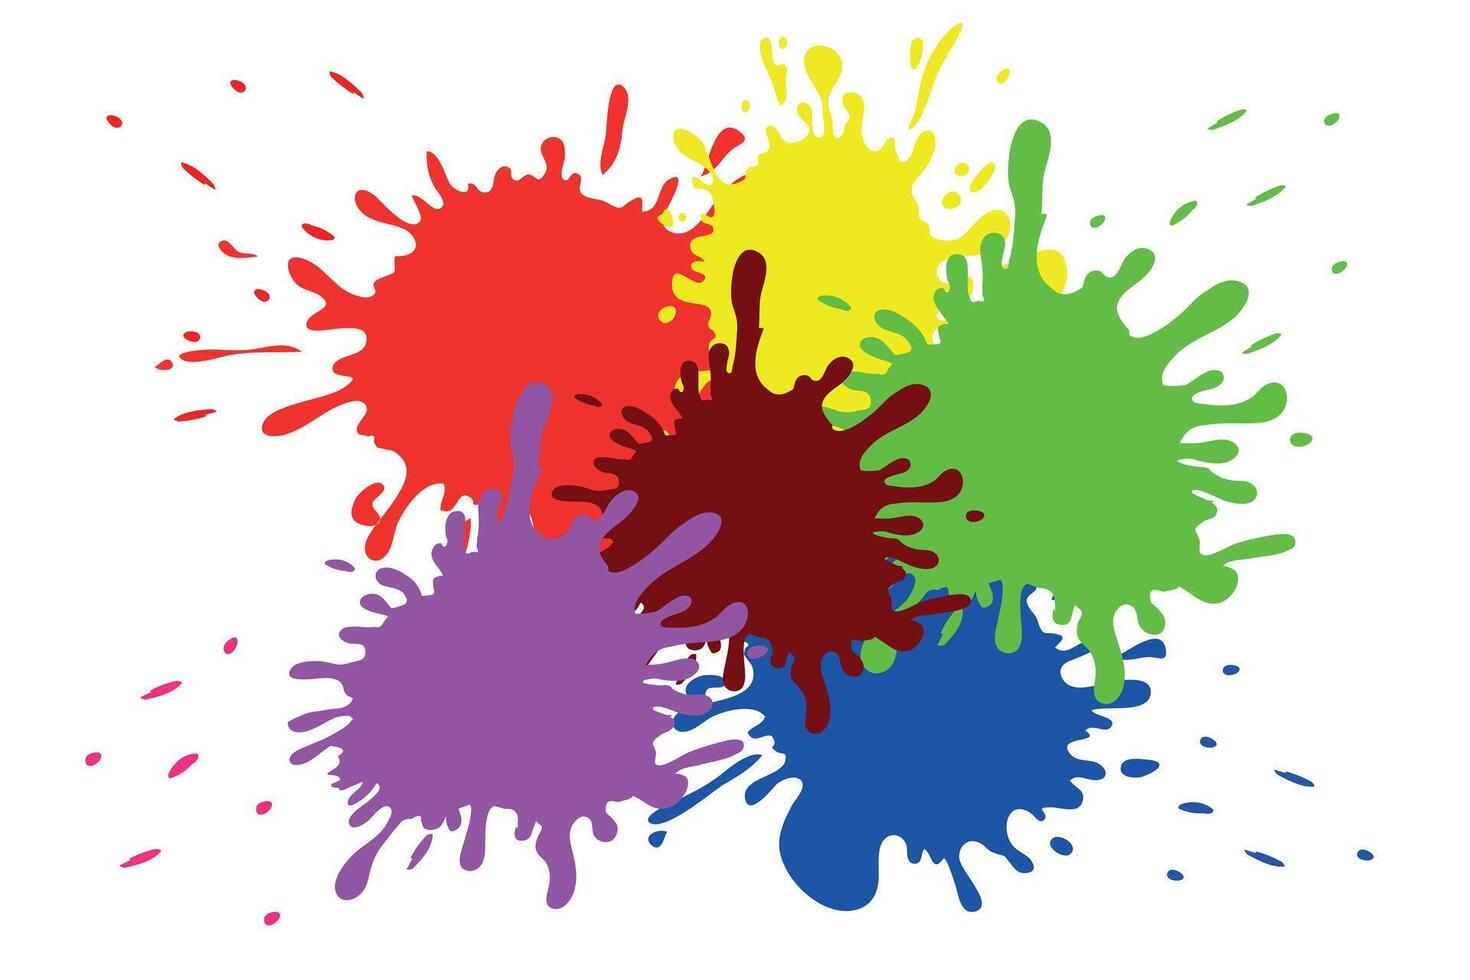 Splashes of colored paint. Colorful multi-colored spots, an explosion of abstract colors. Vector modern set of inkblots.